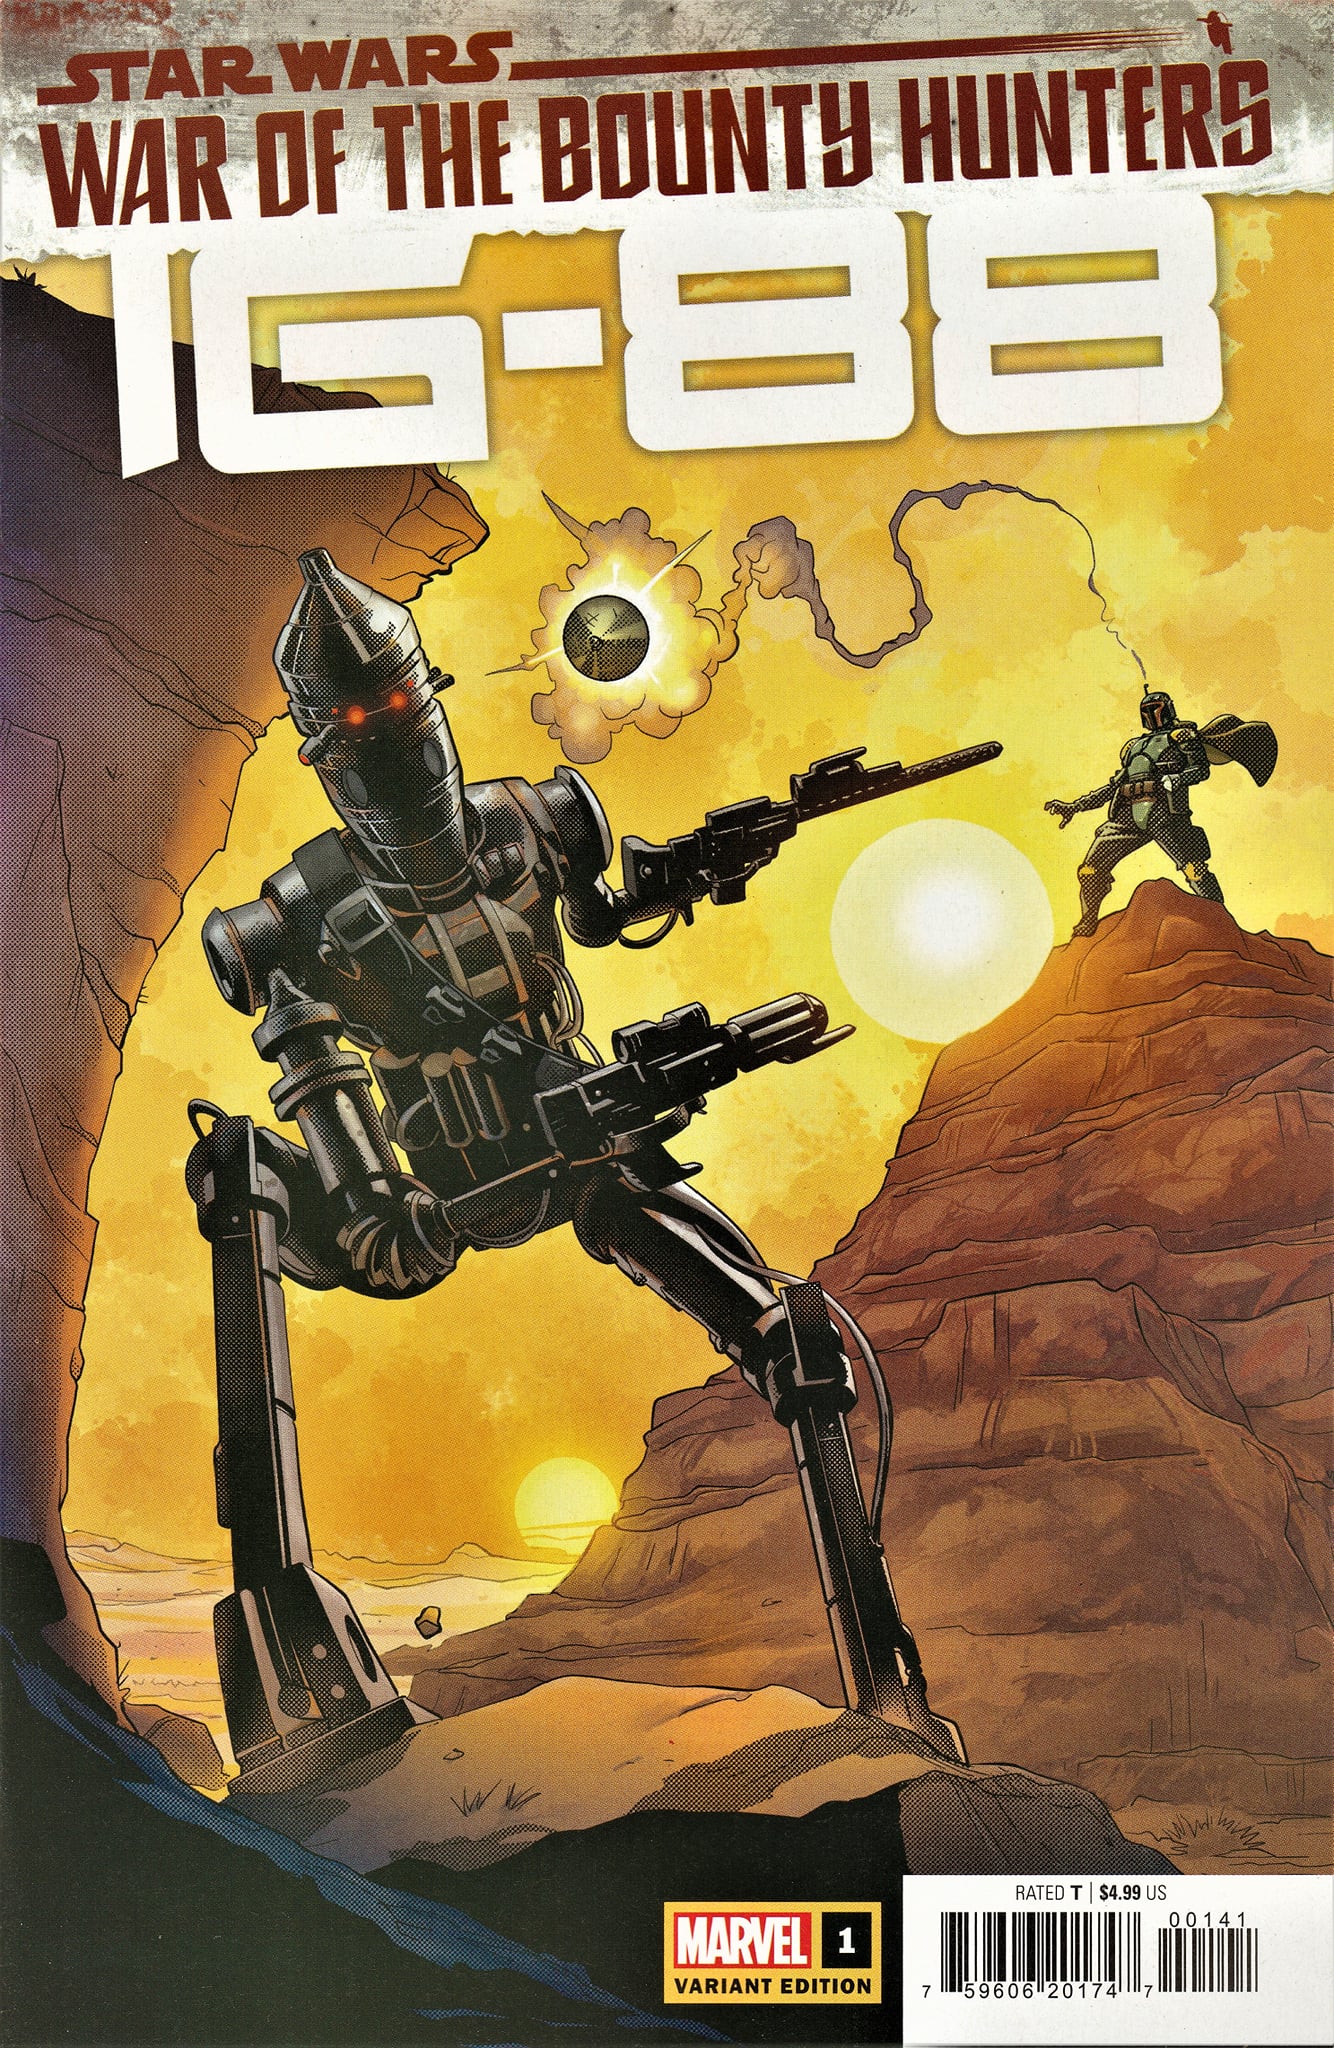 War of the Bounty Hunters: IG-88 #1 (Ray-Anthony Height Variant Cover) (27.10.2021)